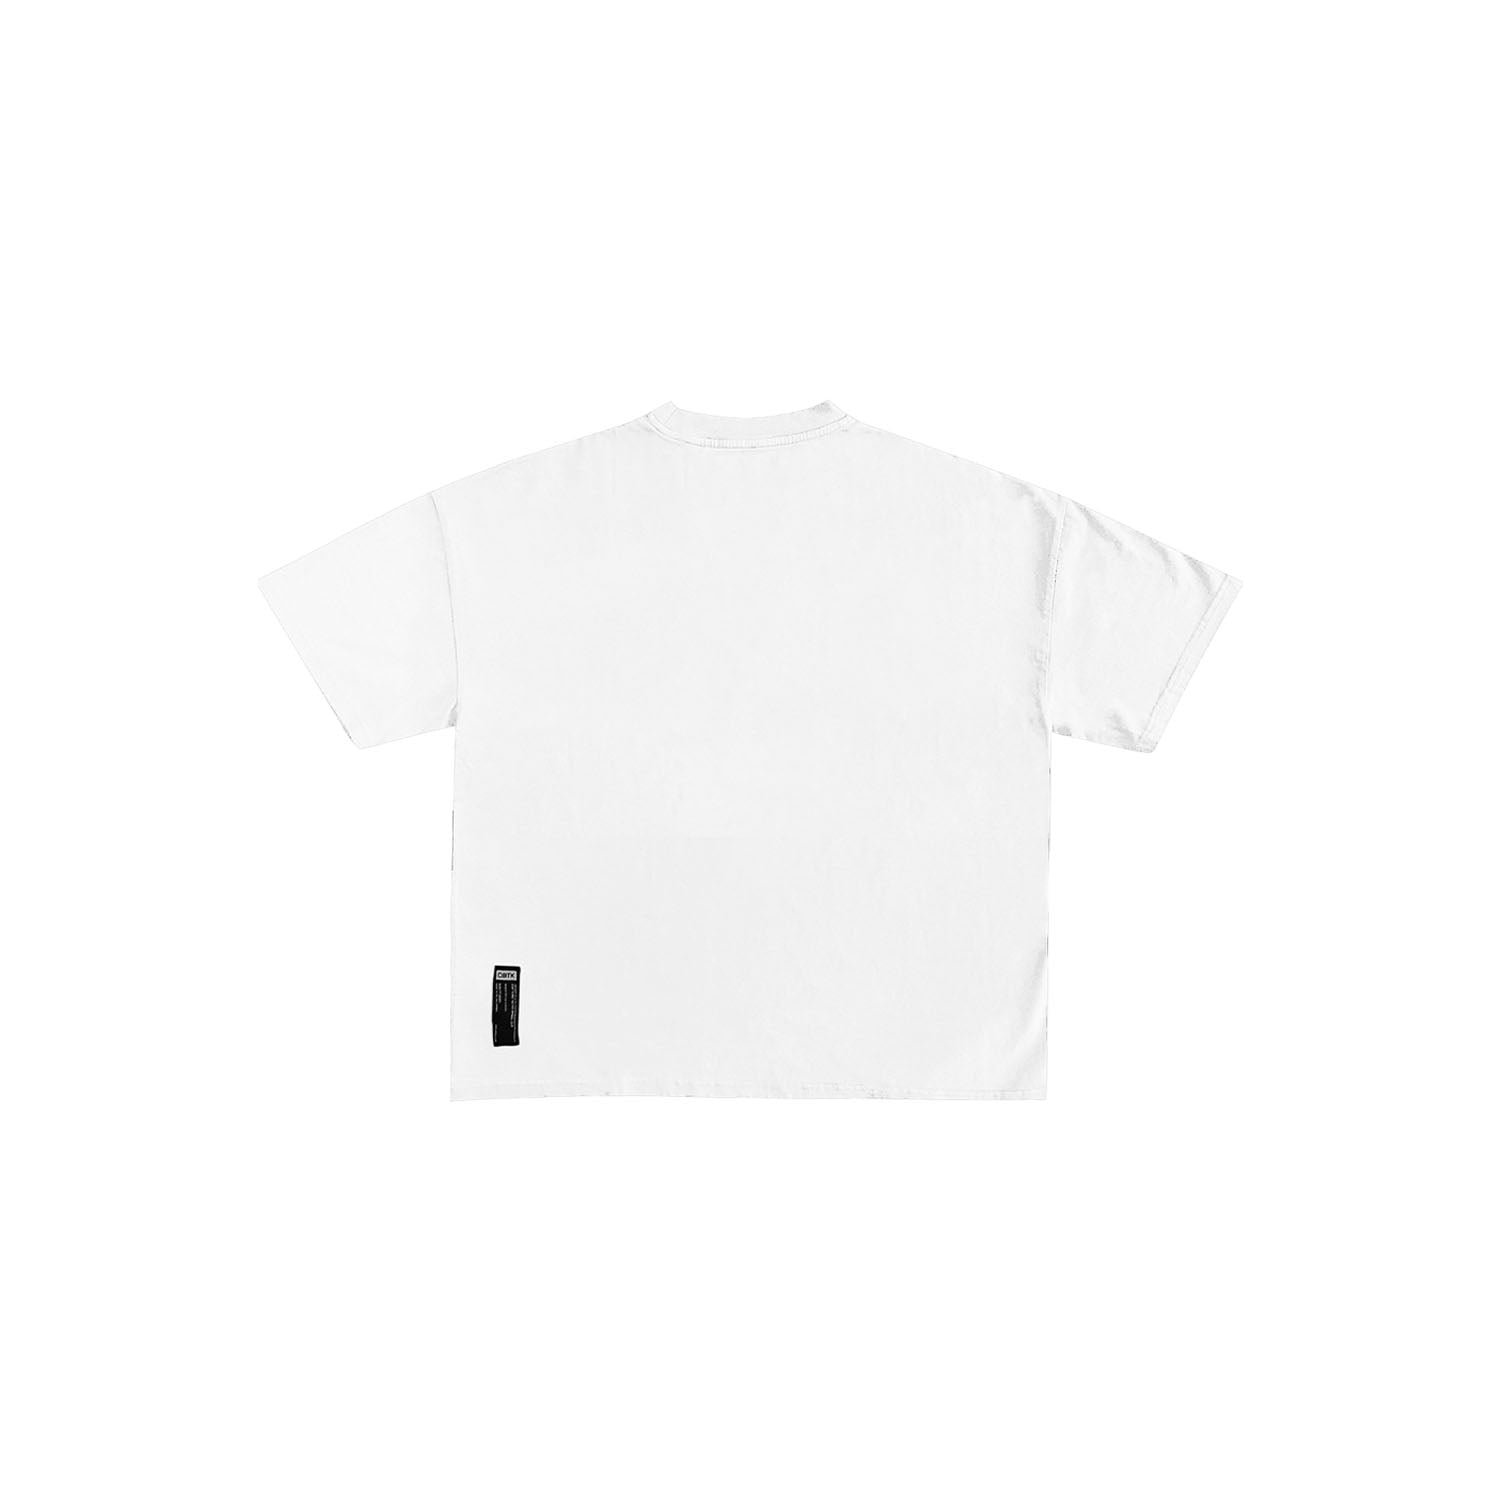 DBTK COMPASS TEE - WHITE – Don't Blame The Kids Apparel